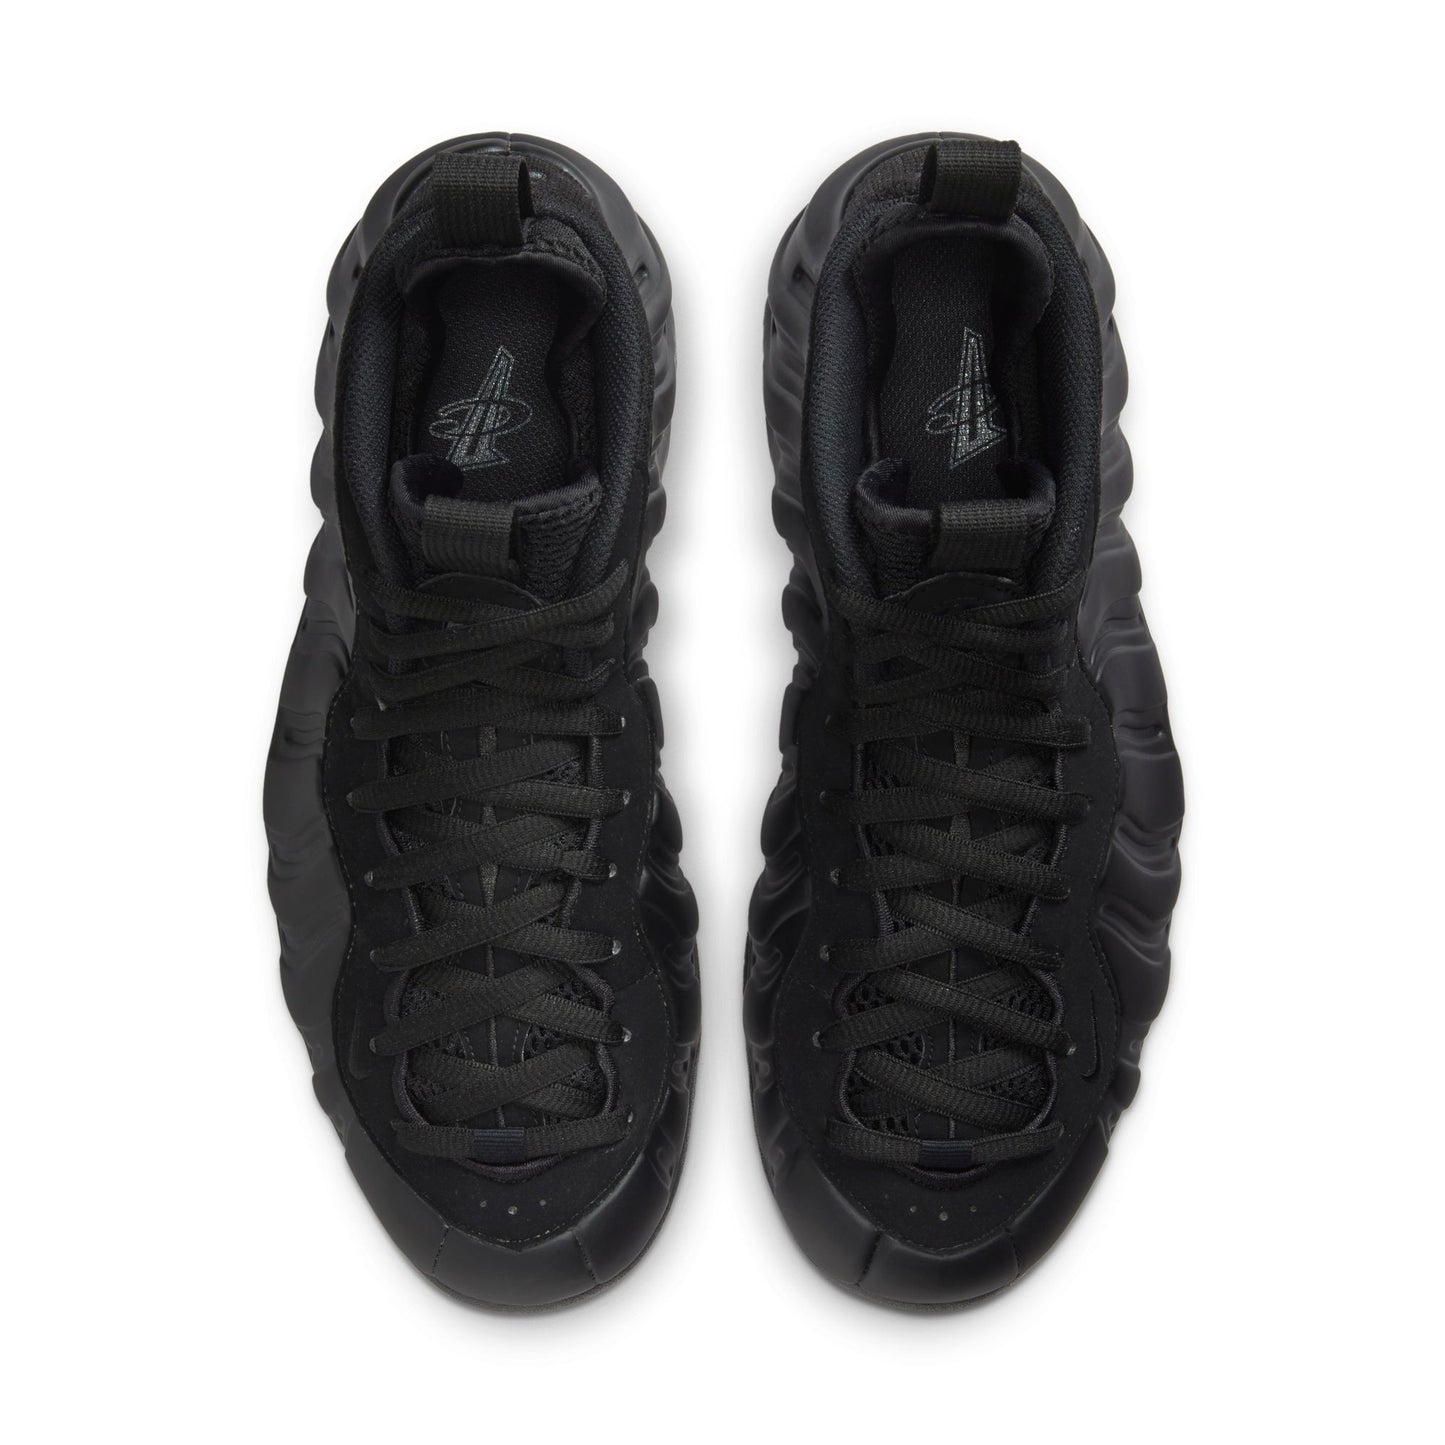 Nike Air Foamposite One "Anthracite" - FD5855-001